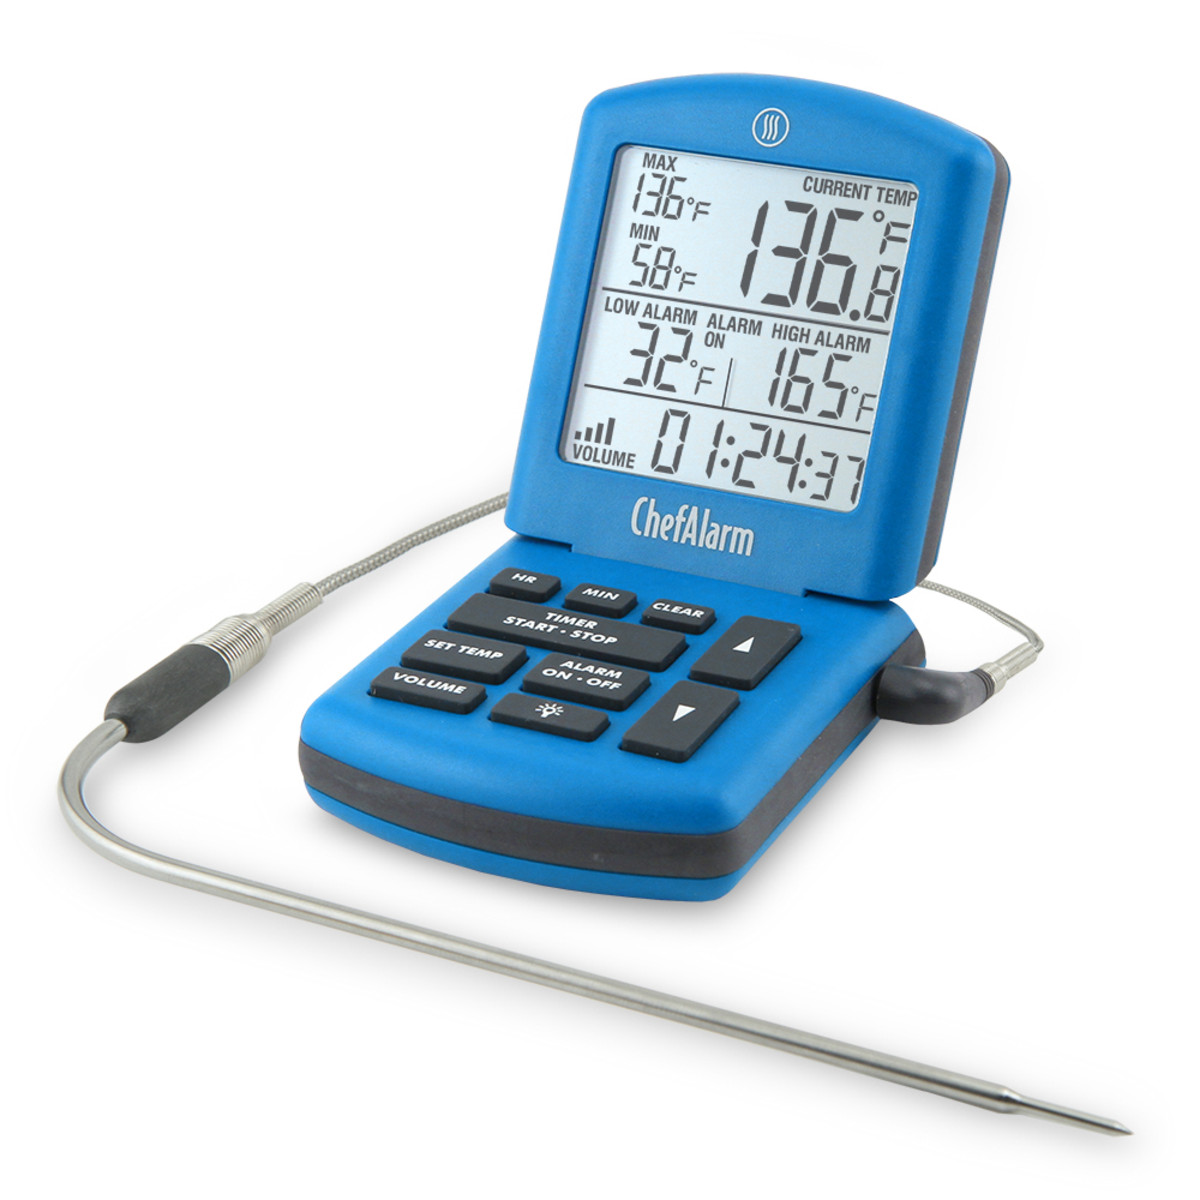 New Toy Tool - Thermapen Splash-Proof Thermometer - Food & FireFood & Fire